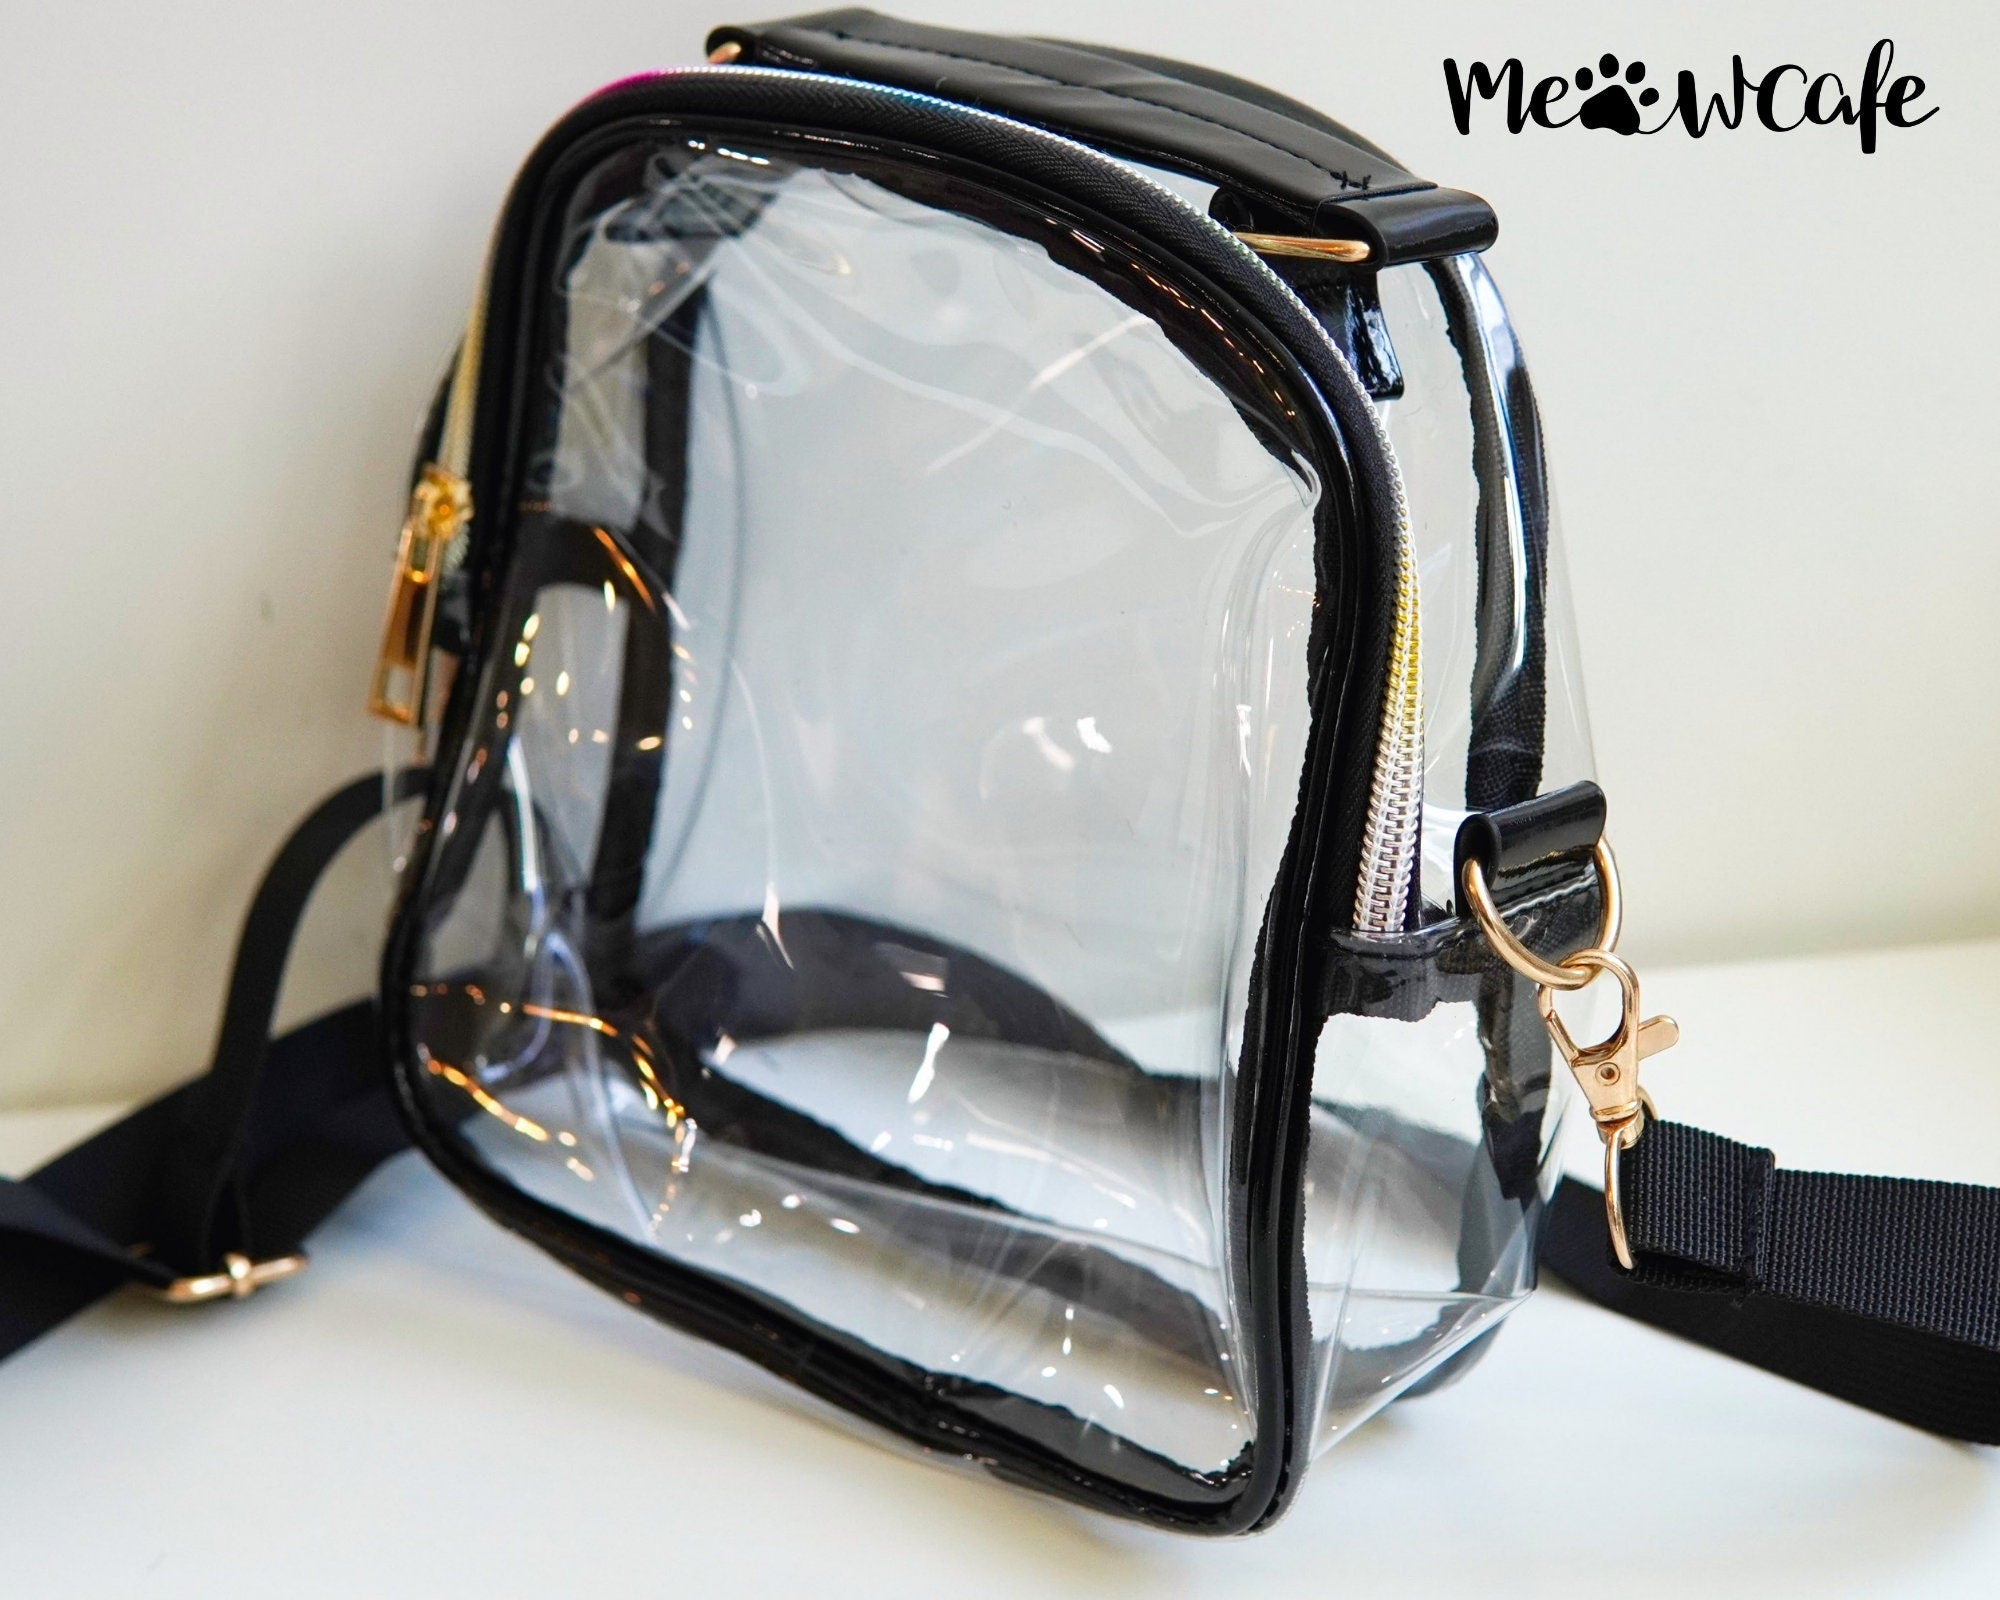 Game Day Style: Cute Clear Purses and Clear Bags for Football Games